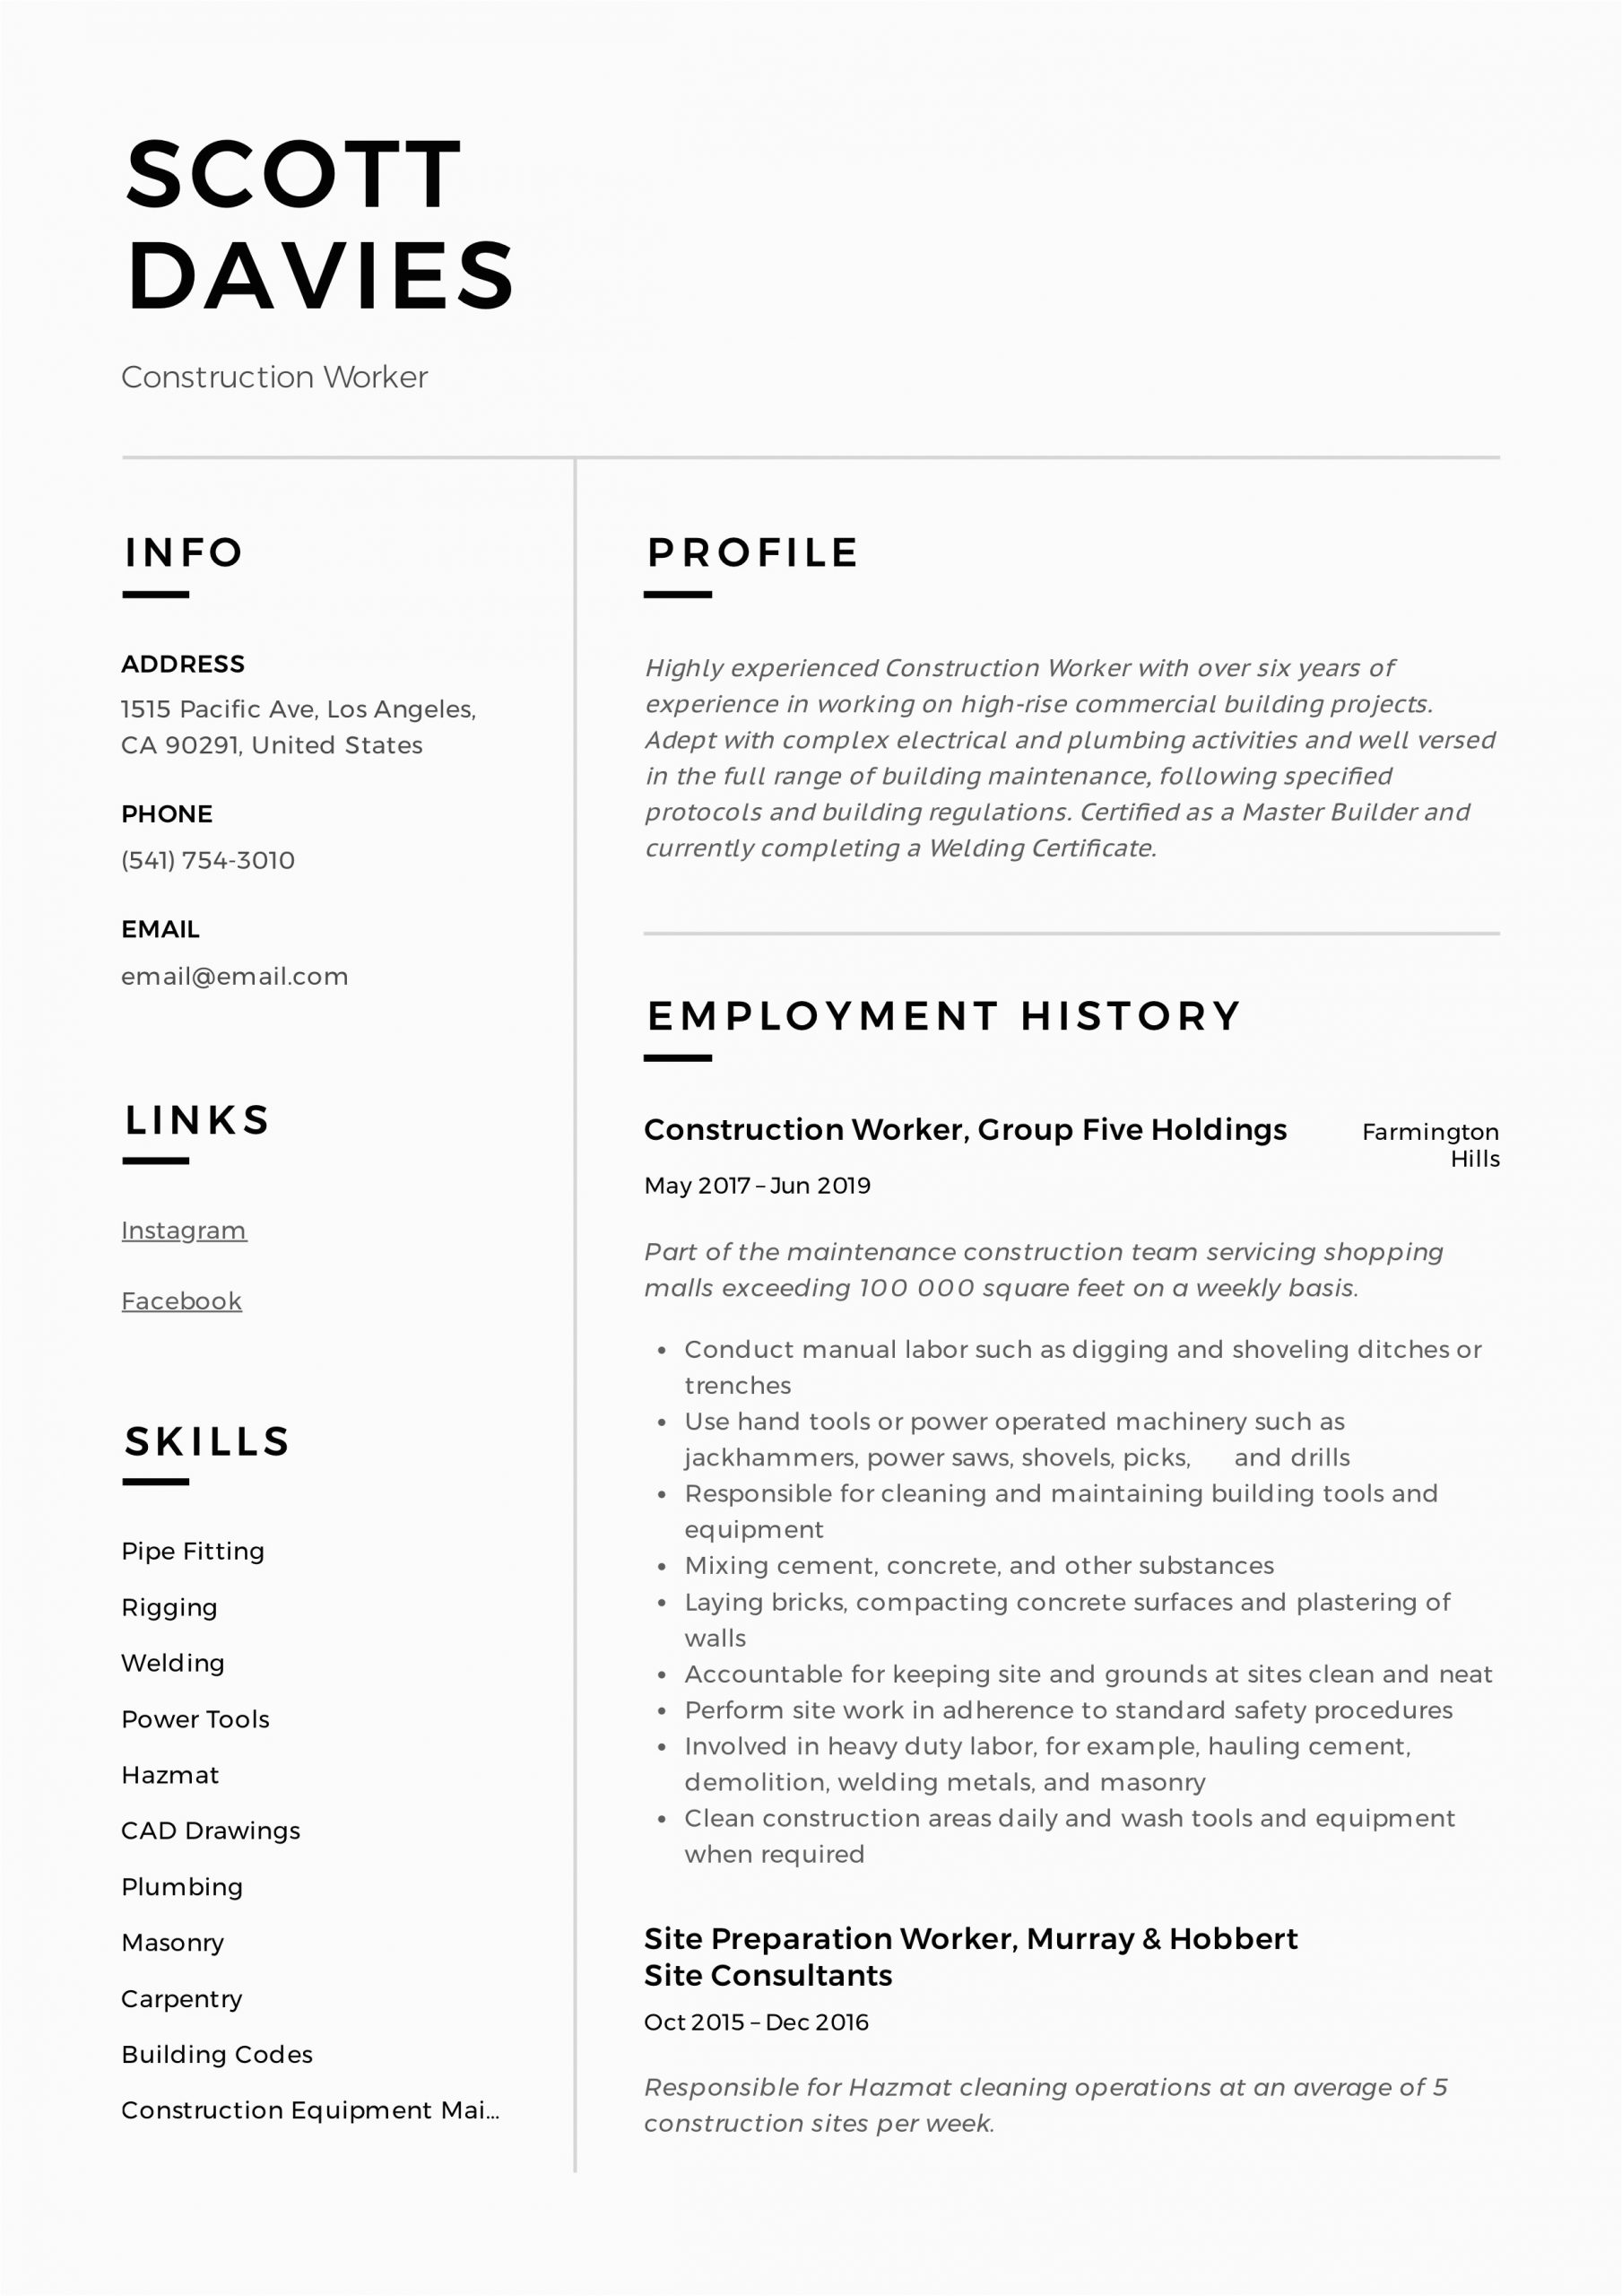 Free Resume Templates for Construction Workers Construction Worker Resume & Writing Guide